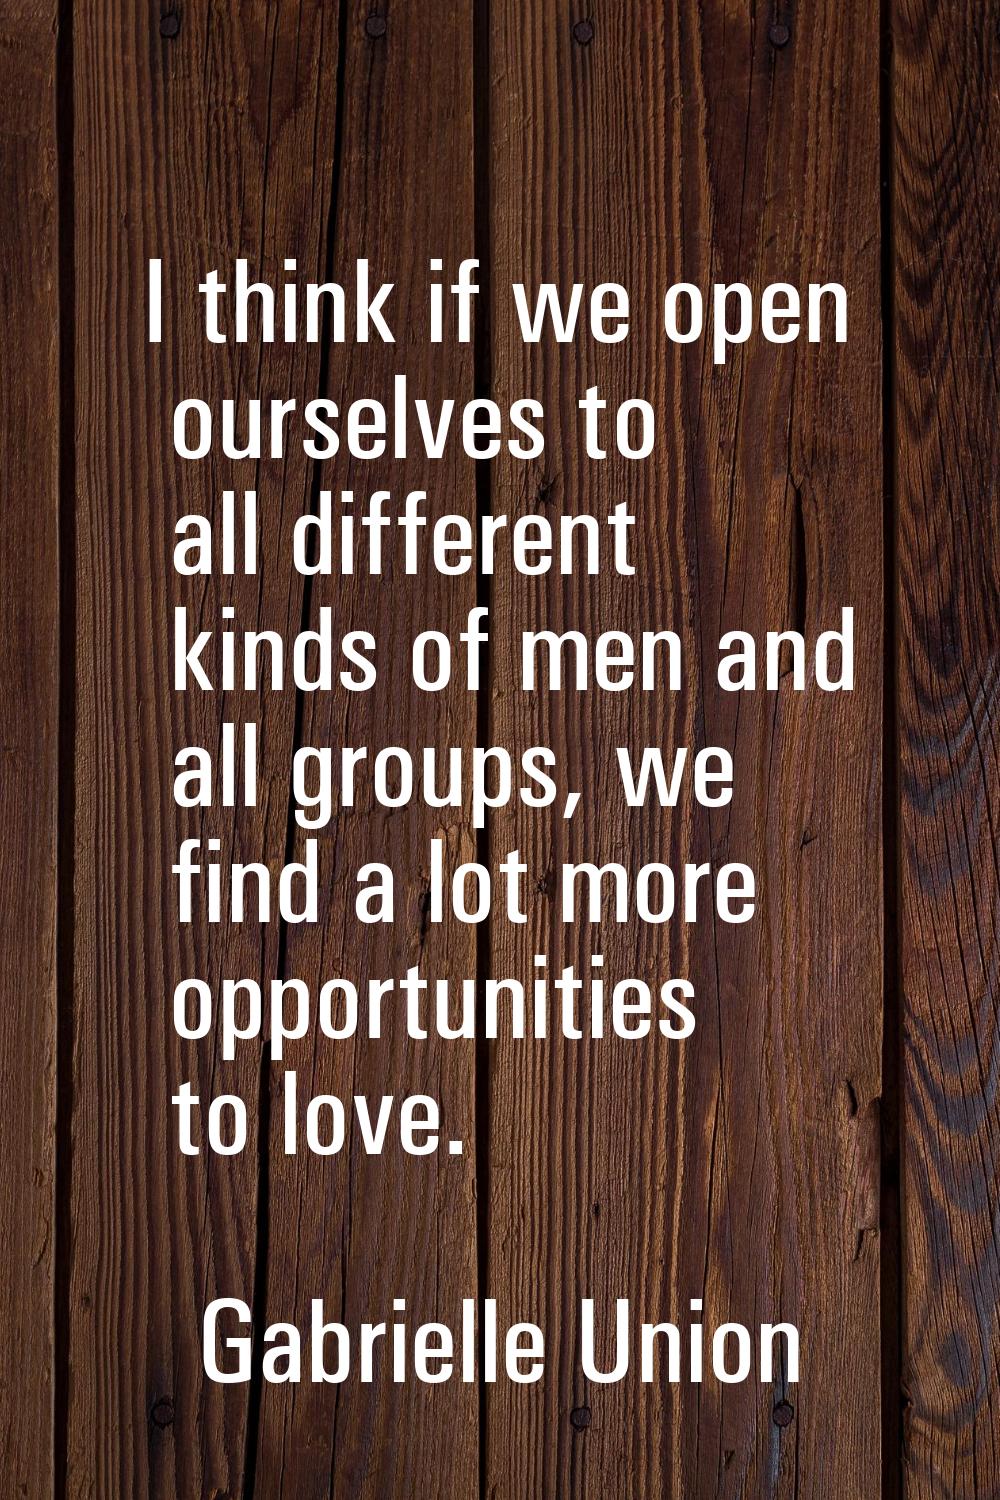 I think if we open ourselves to all different kinds of men and all groups, we find a lot more oppor